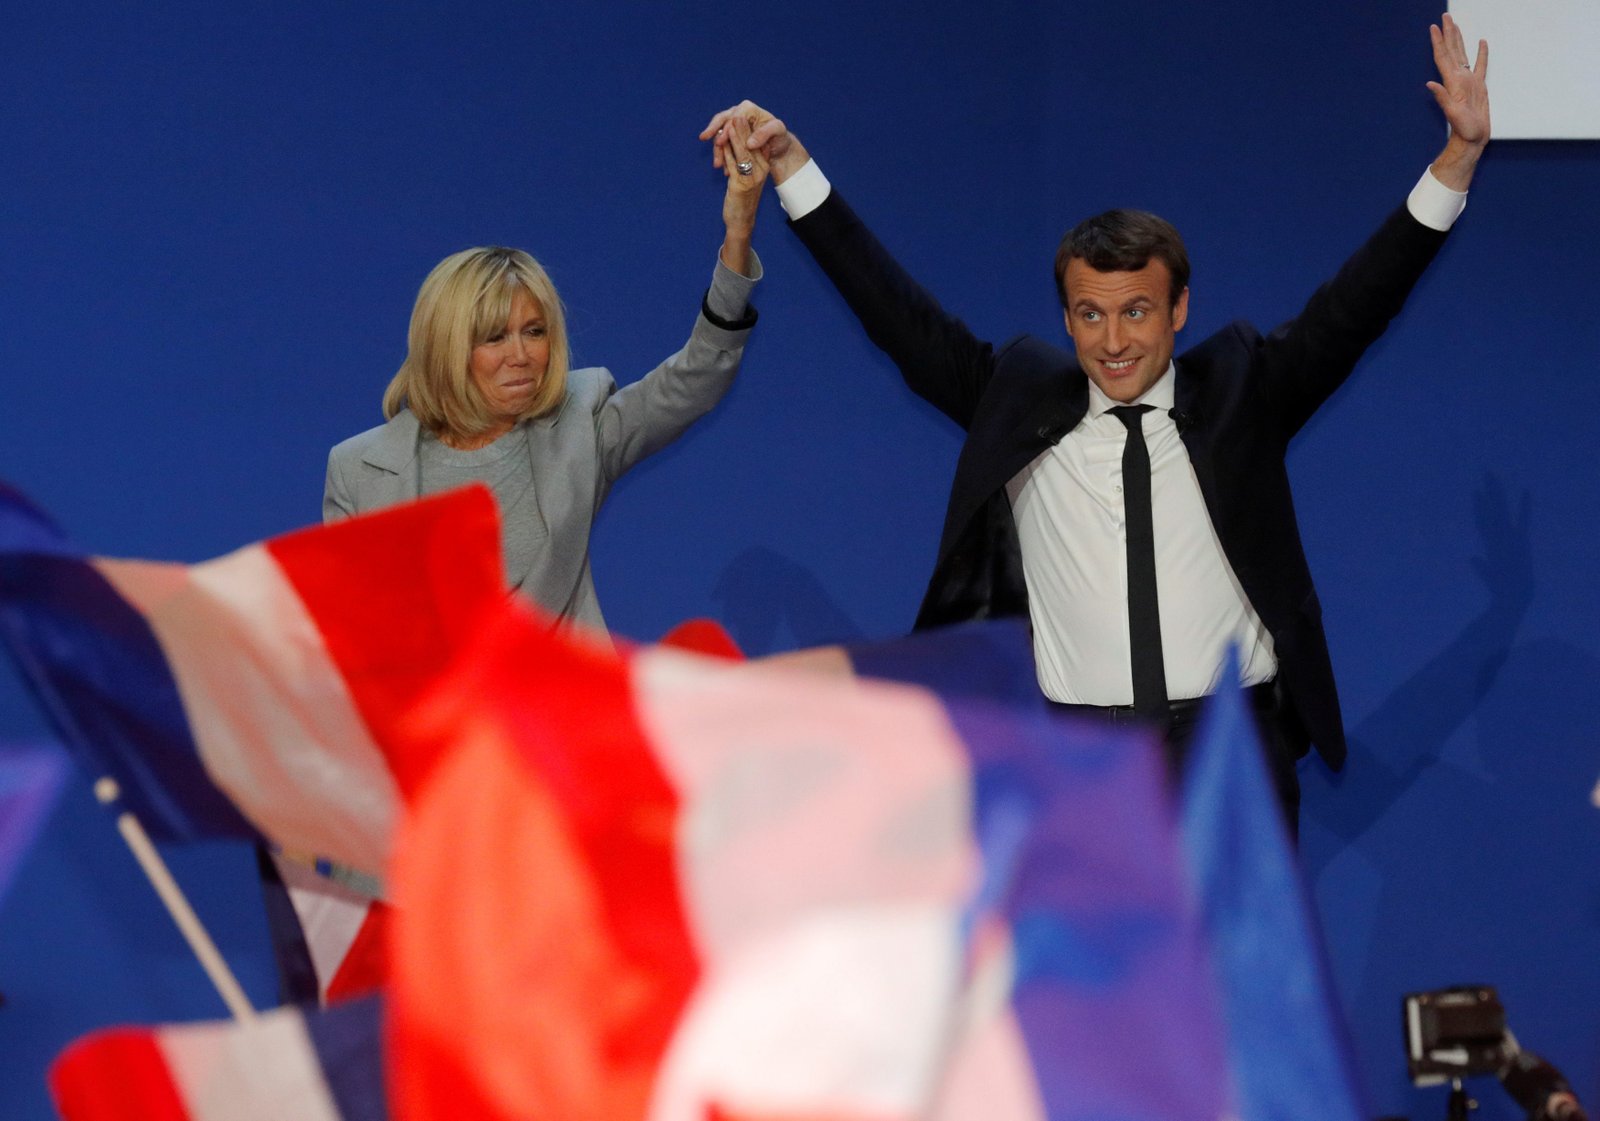 Emmanuel Macron, head of the political movement En Marche !, or Onwards !, and candidate for the 2017 French presidential election, arrives on stage with his wife Brigitte Trogneux to deliver a speech at the Parc des Expositions hall in Paris after early results in the first round of 2017 French presidential election, France, April 23, 2017. REUTERS/Philippe Wojazer